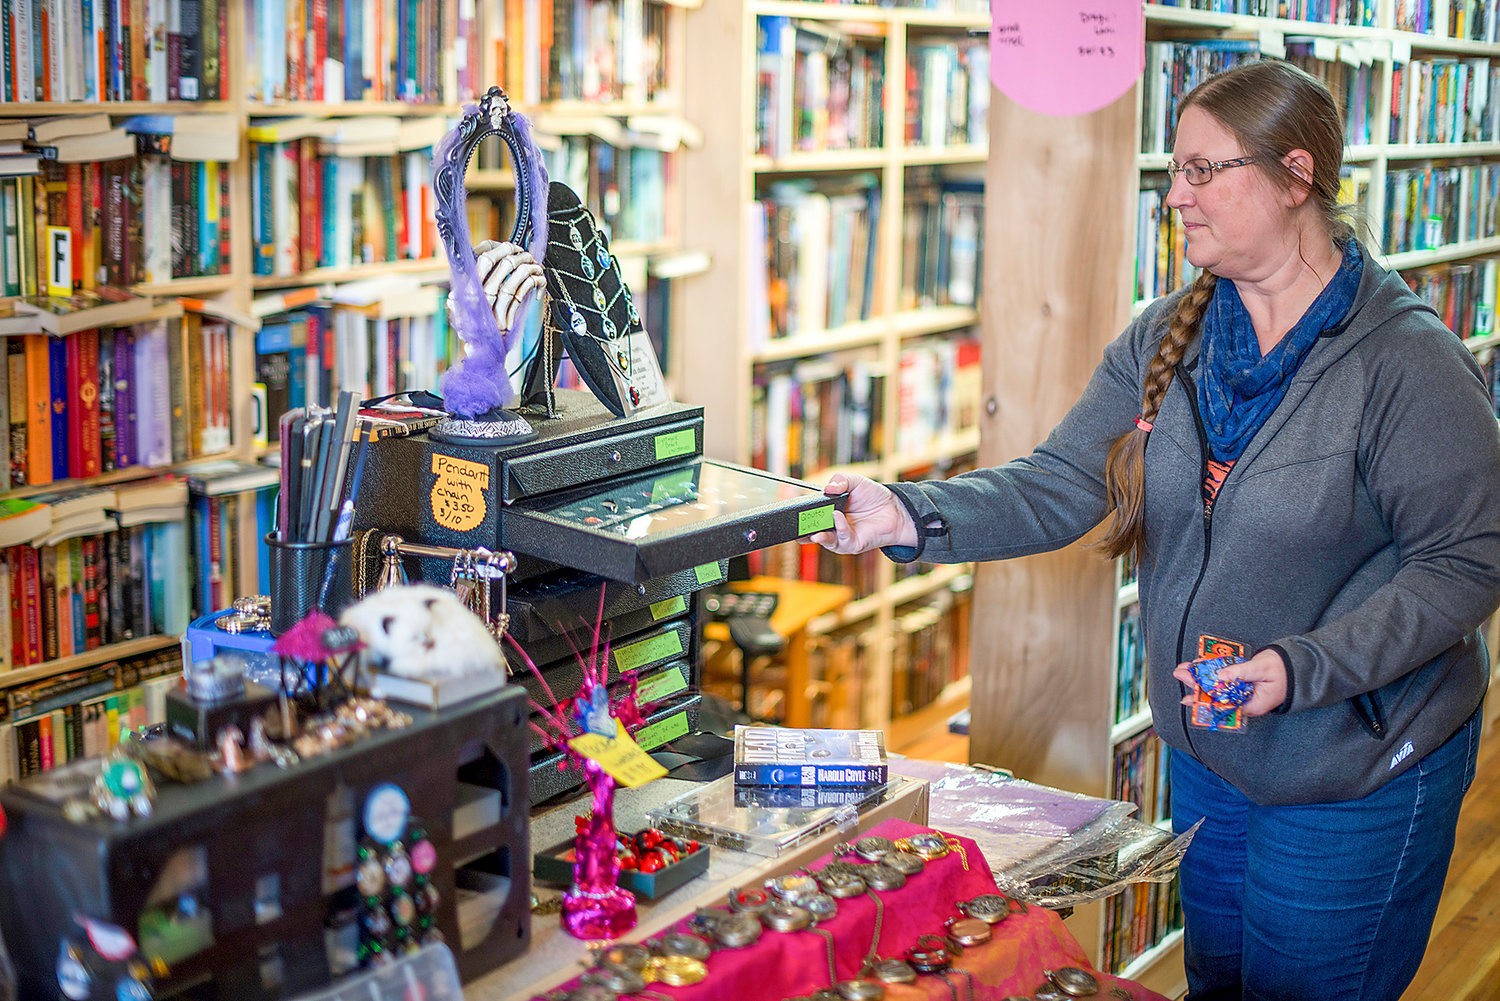 Anderson Book Company owner LaRae Roe shows off some of the other items she has for sale, including charms and pocket watches.